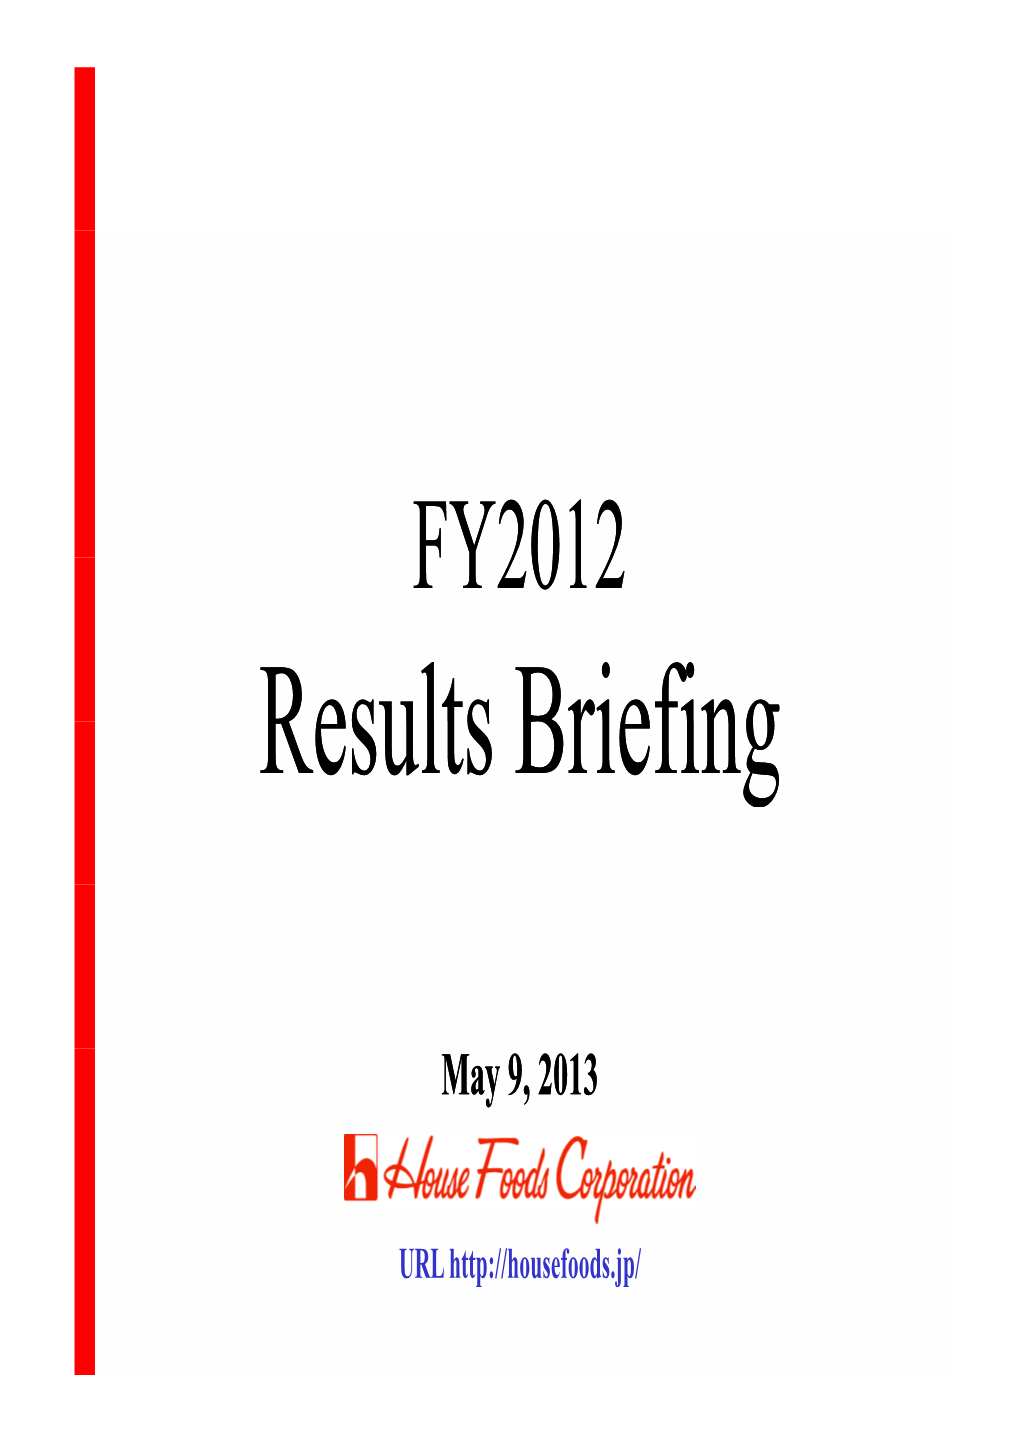 Results Briefing（PDF 28 PAGES [1.12MB]）